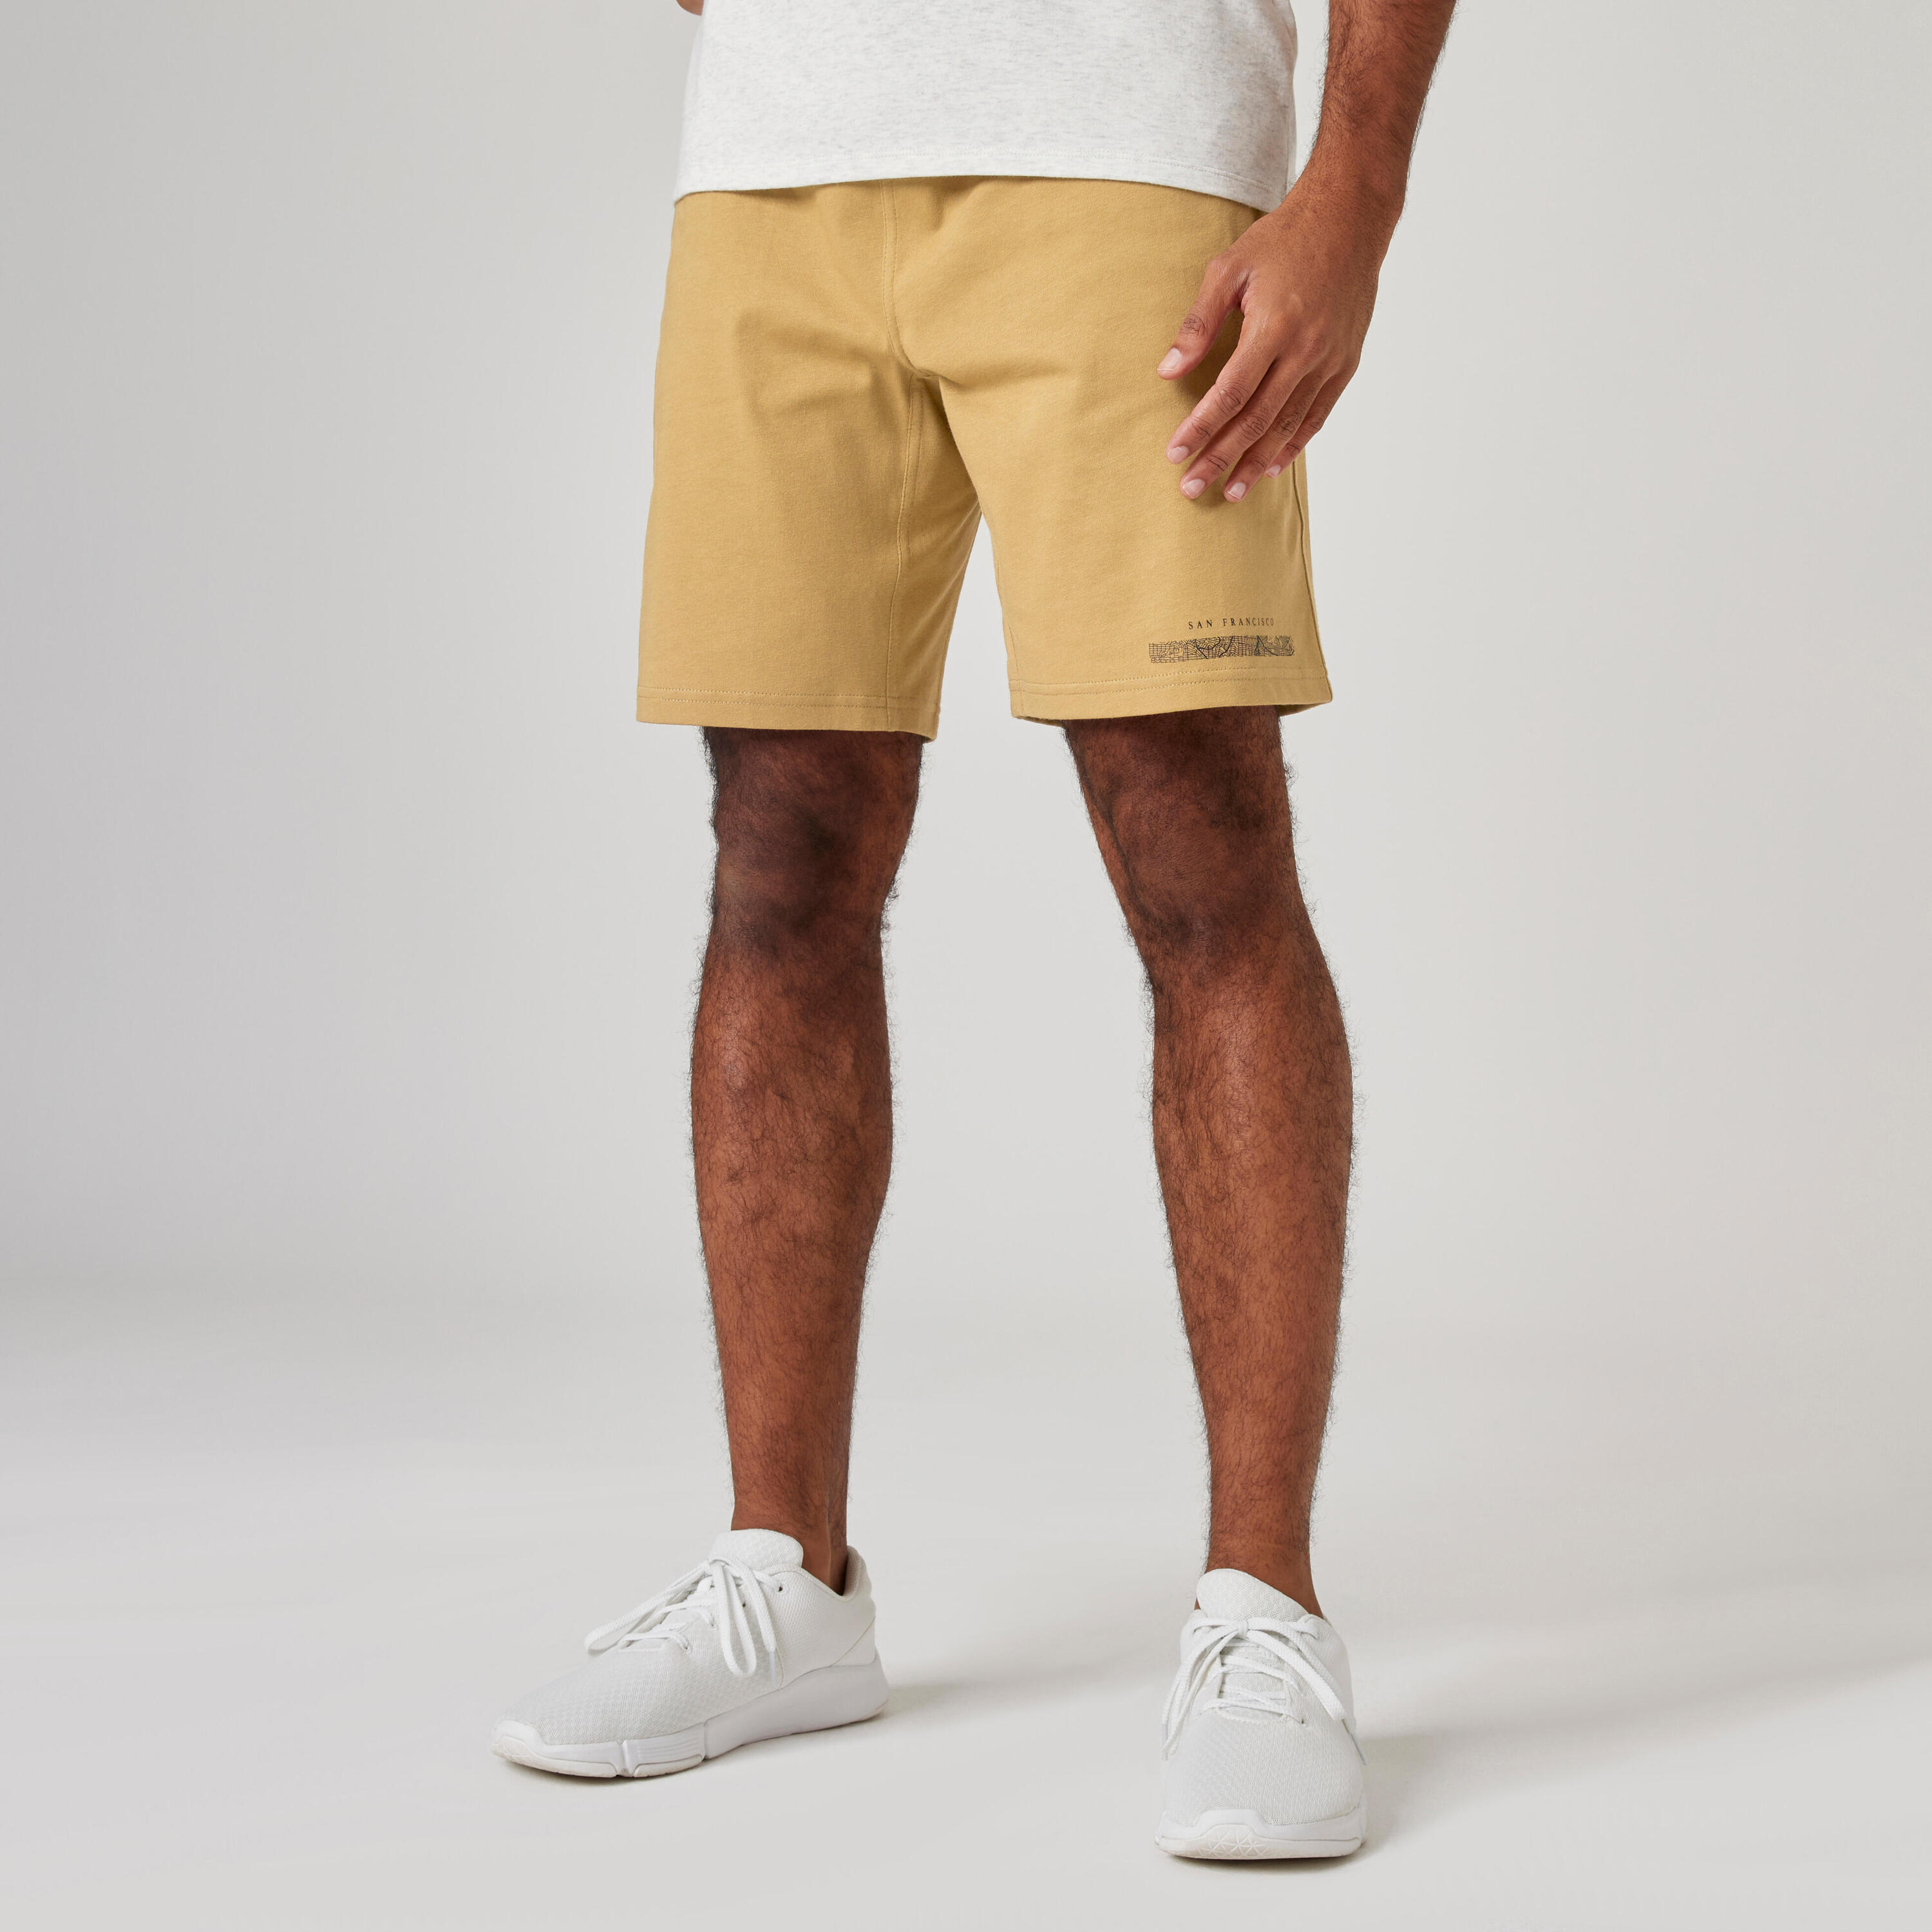 Men's Straight-Cut Cotton Fitness Shorts with Pocket - Beige 1/8